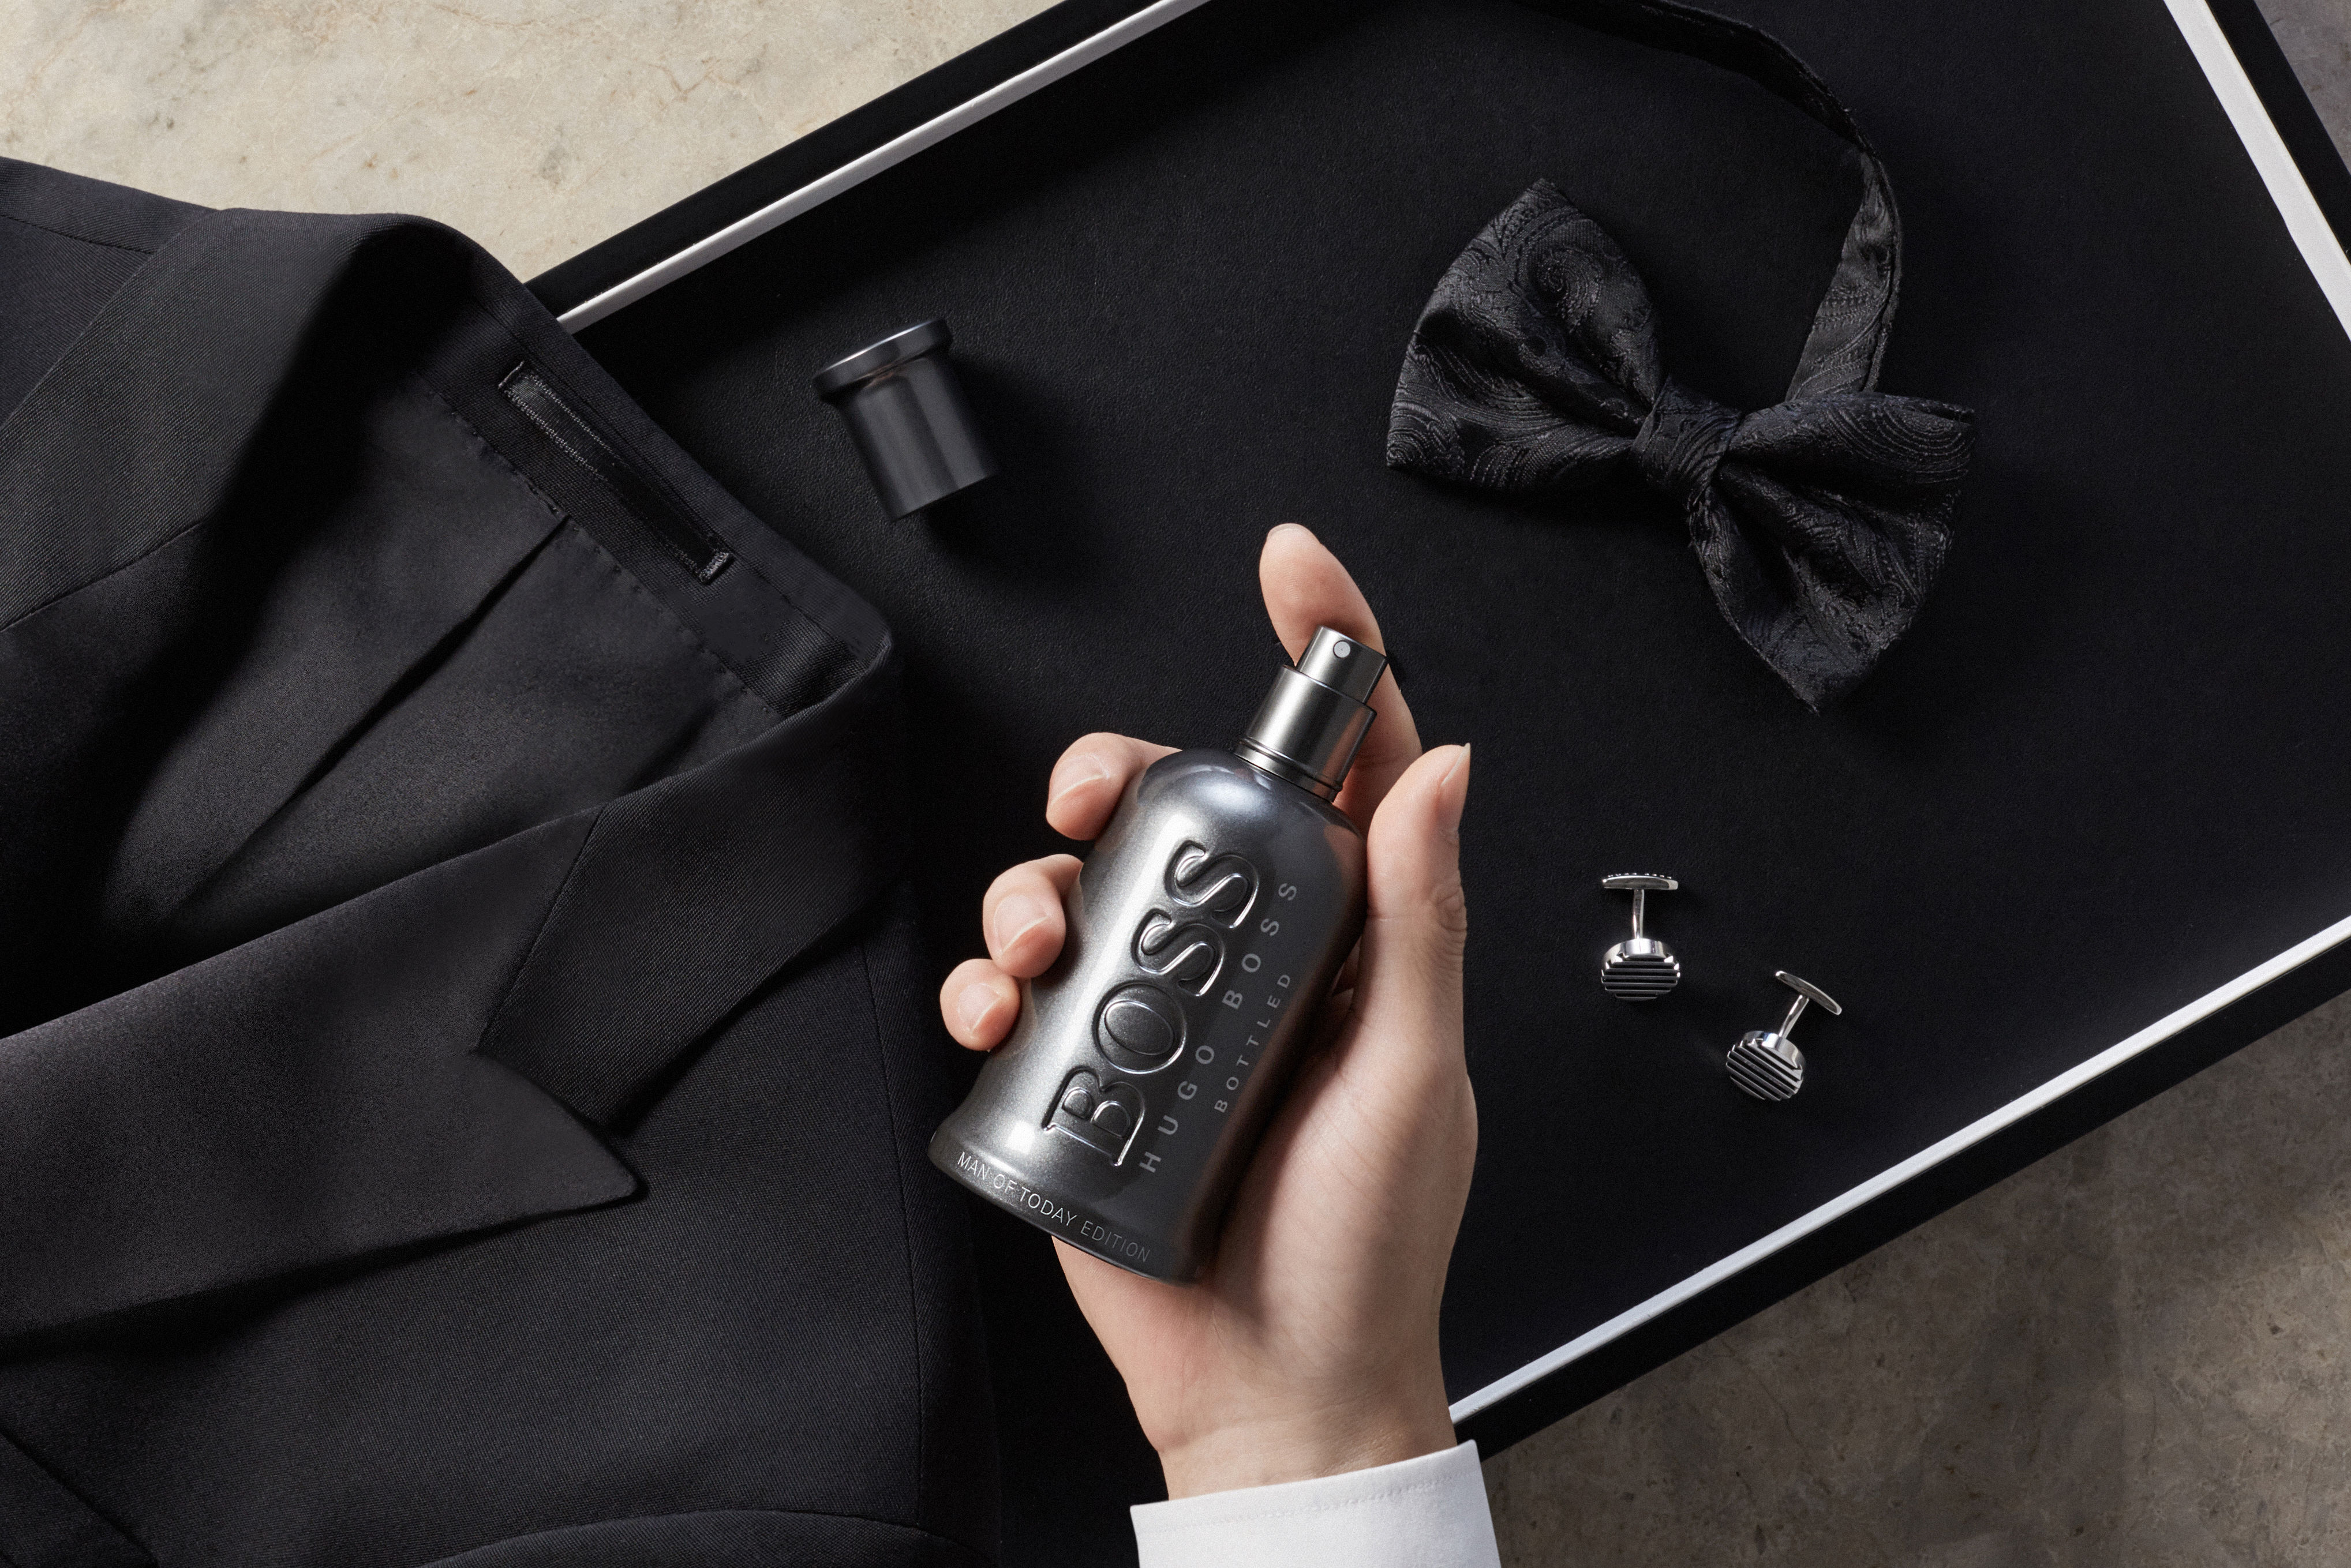 Embody the Man of Many with your BOSS Bottled cologne of choice